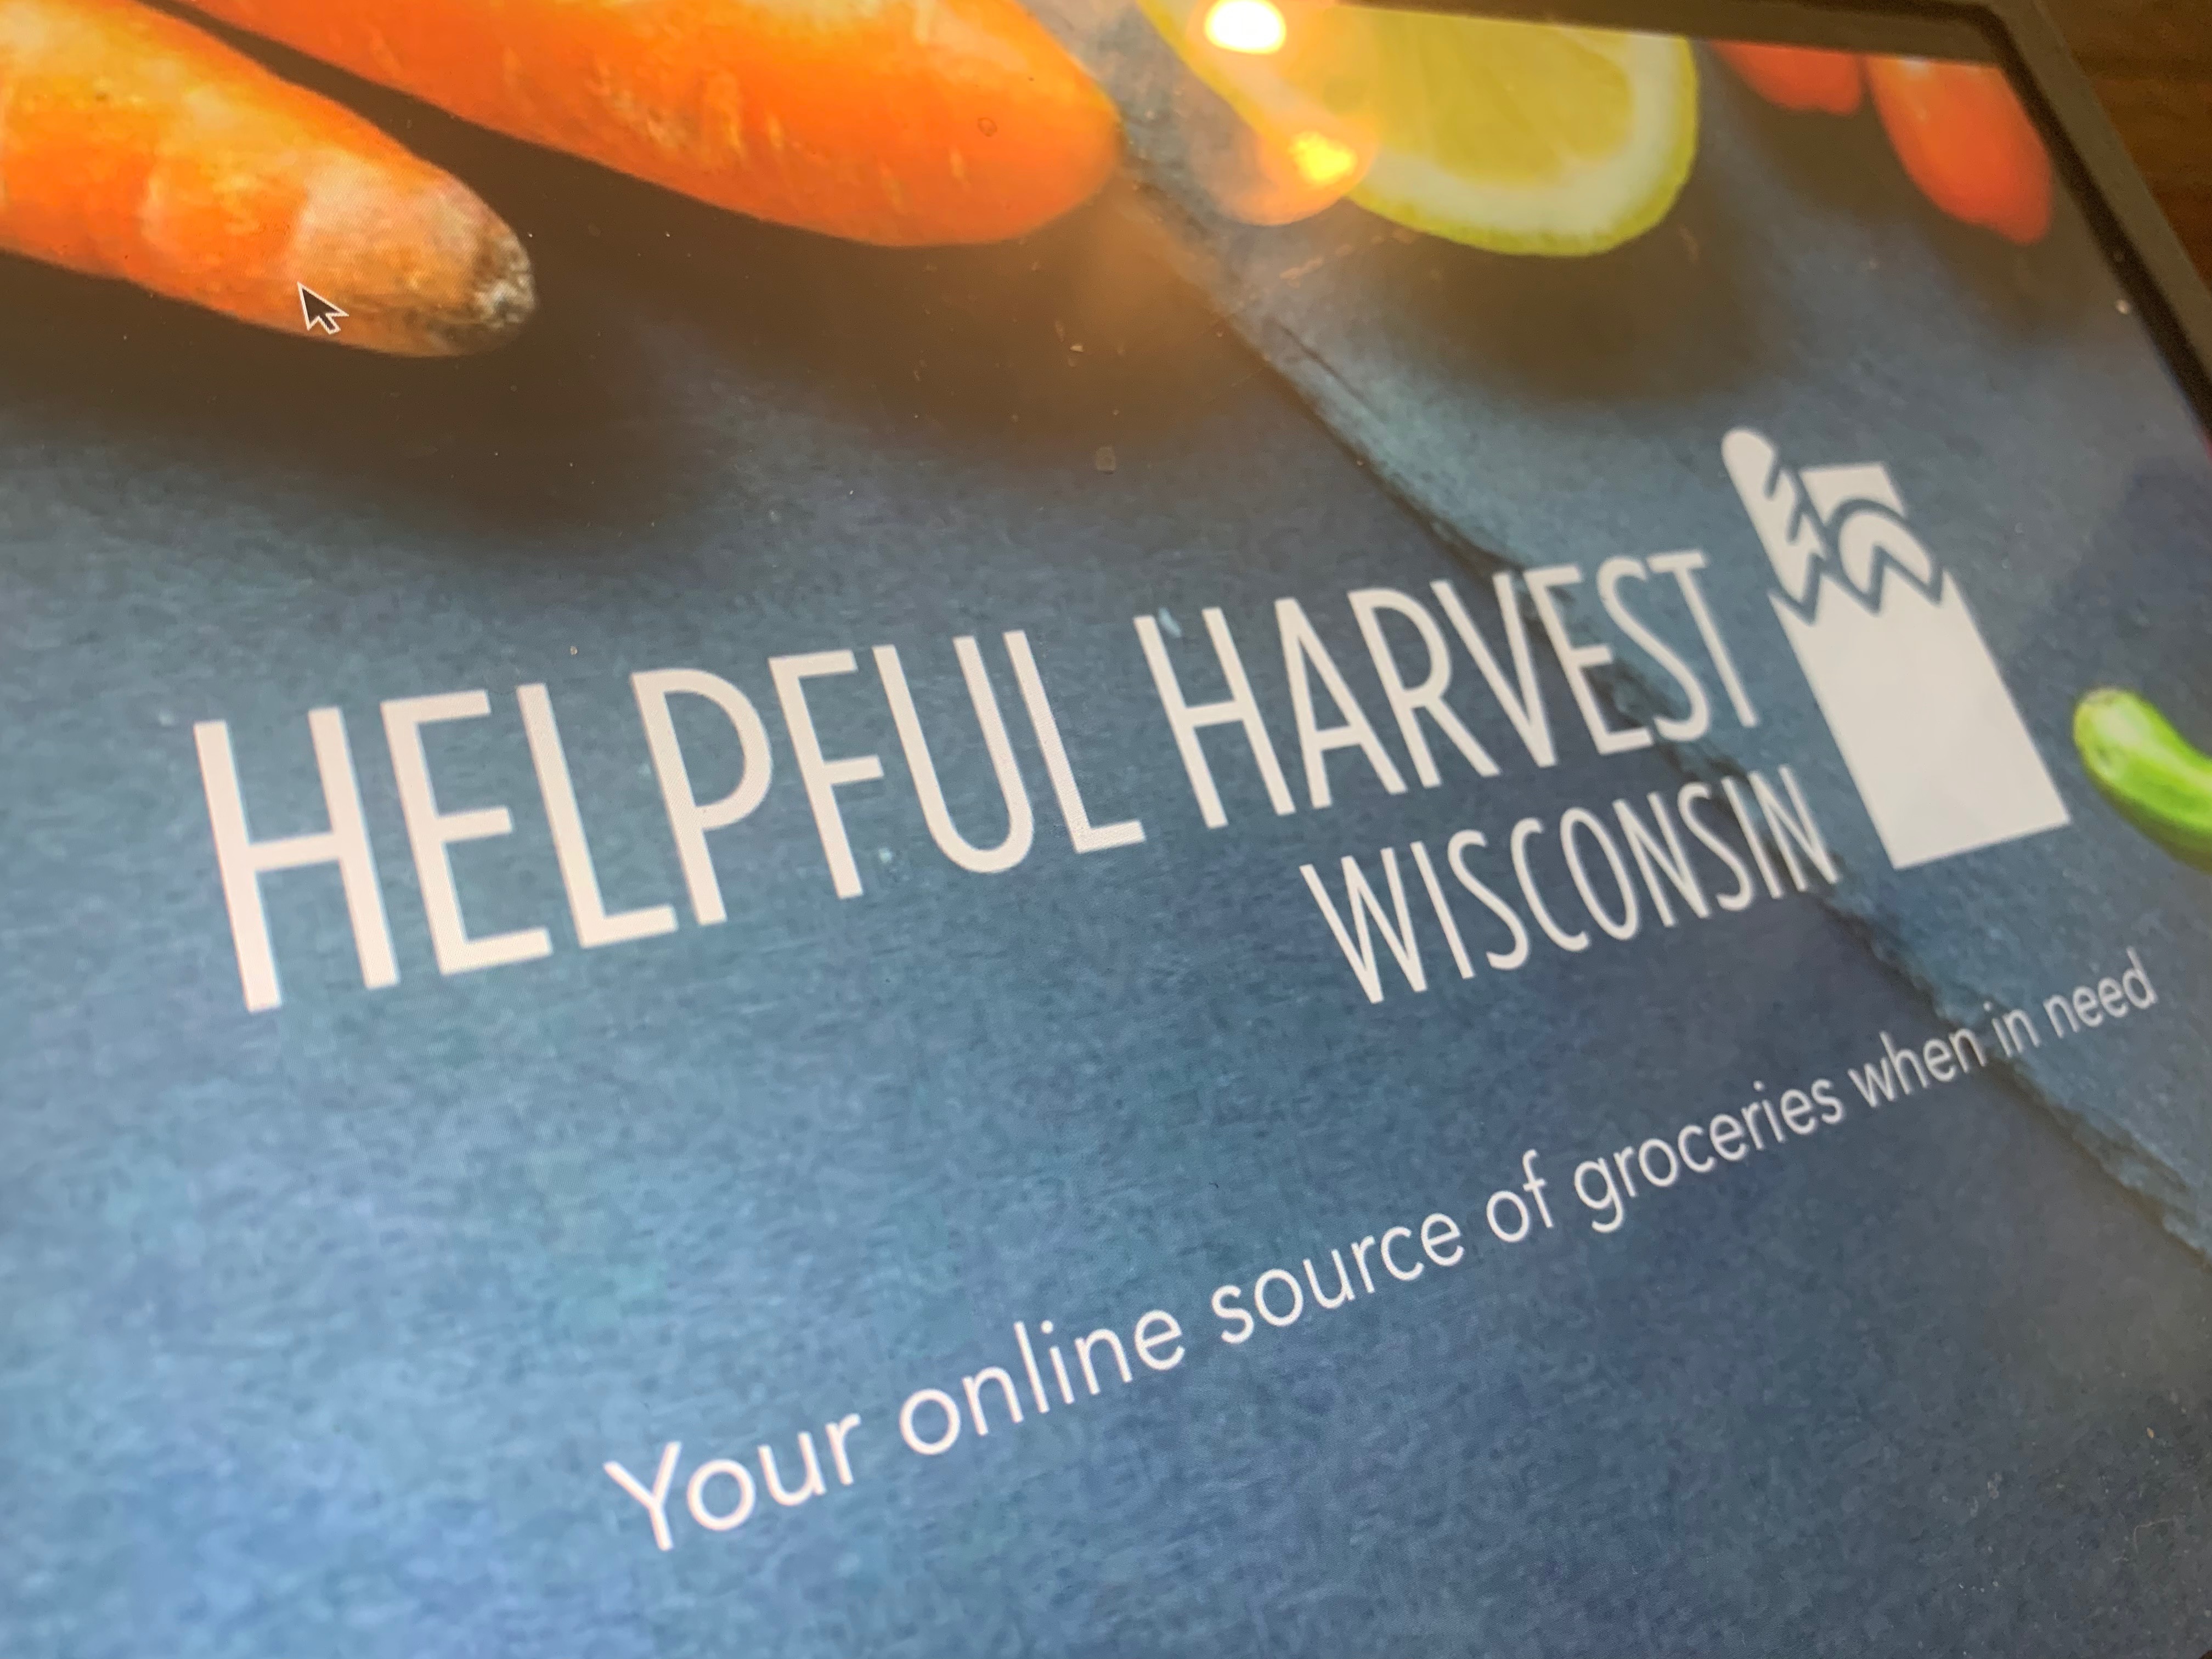 Second Harvest Food Bank Partners with UW to Pilot Online Ordering System